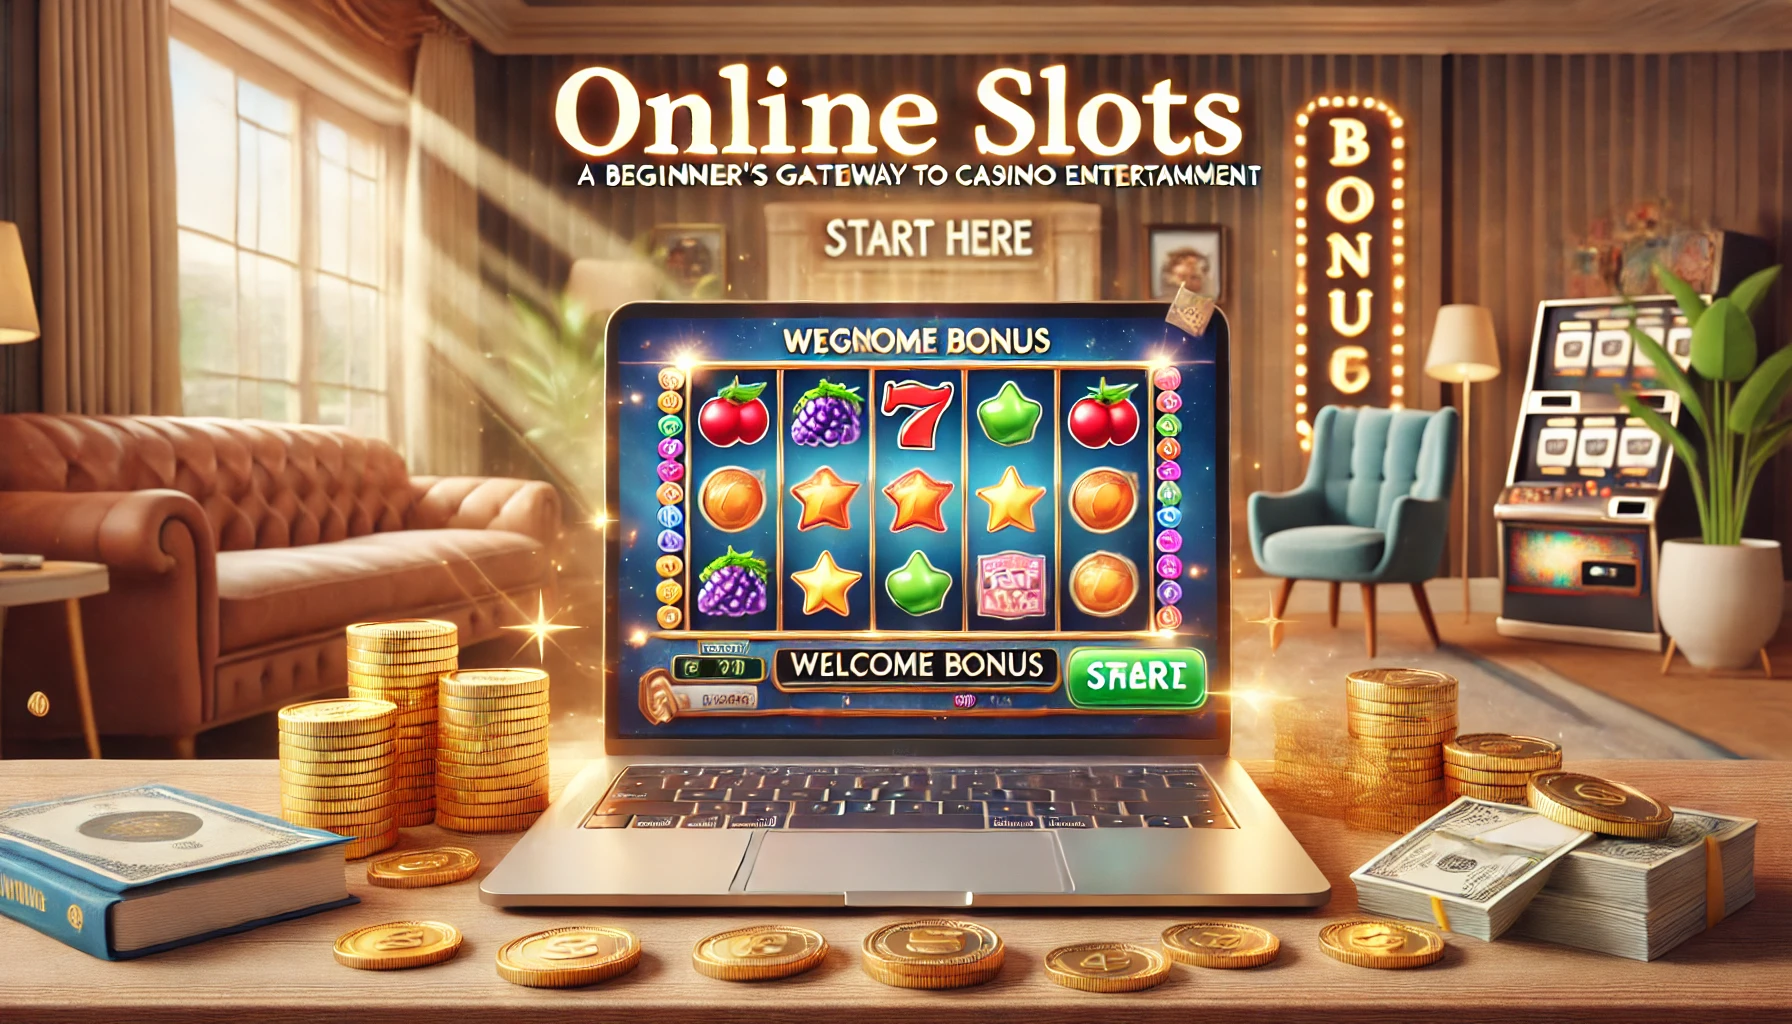 Online Slots: A Beginners Gateway to Casino Entertainment